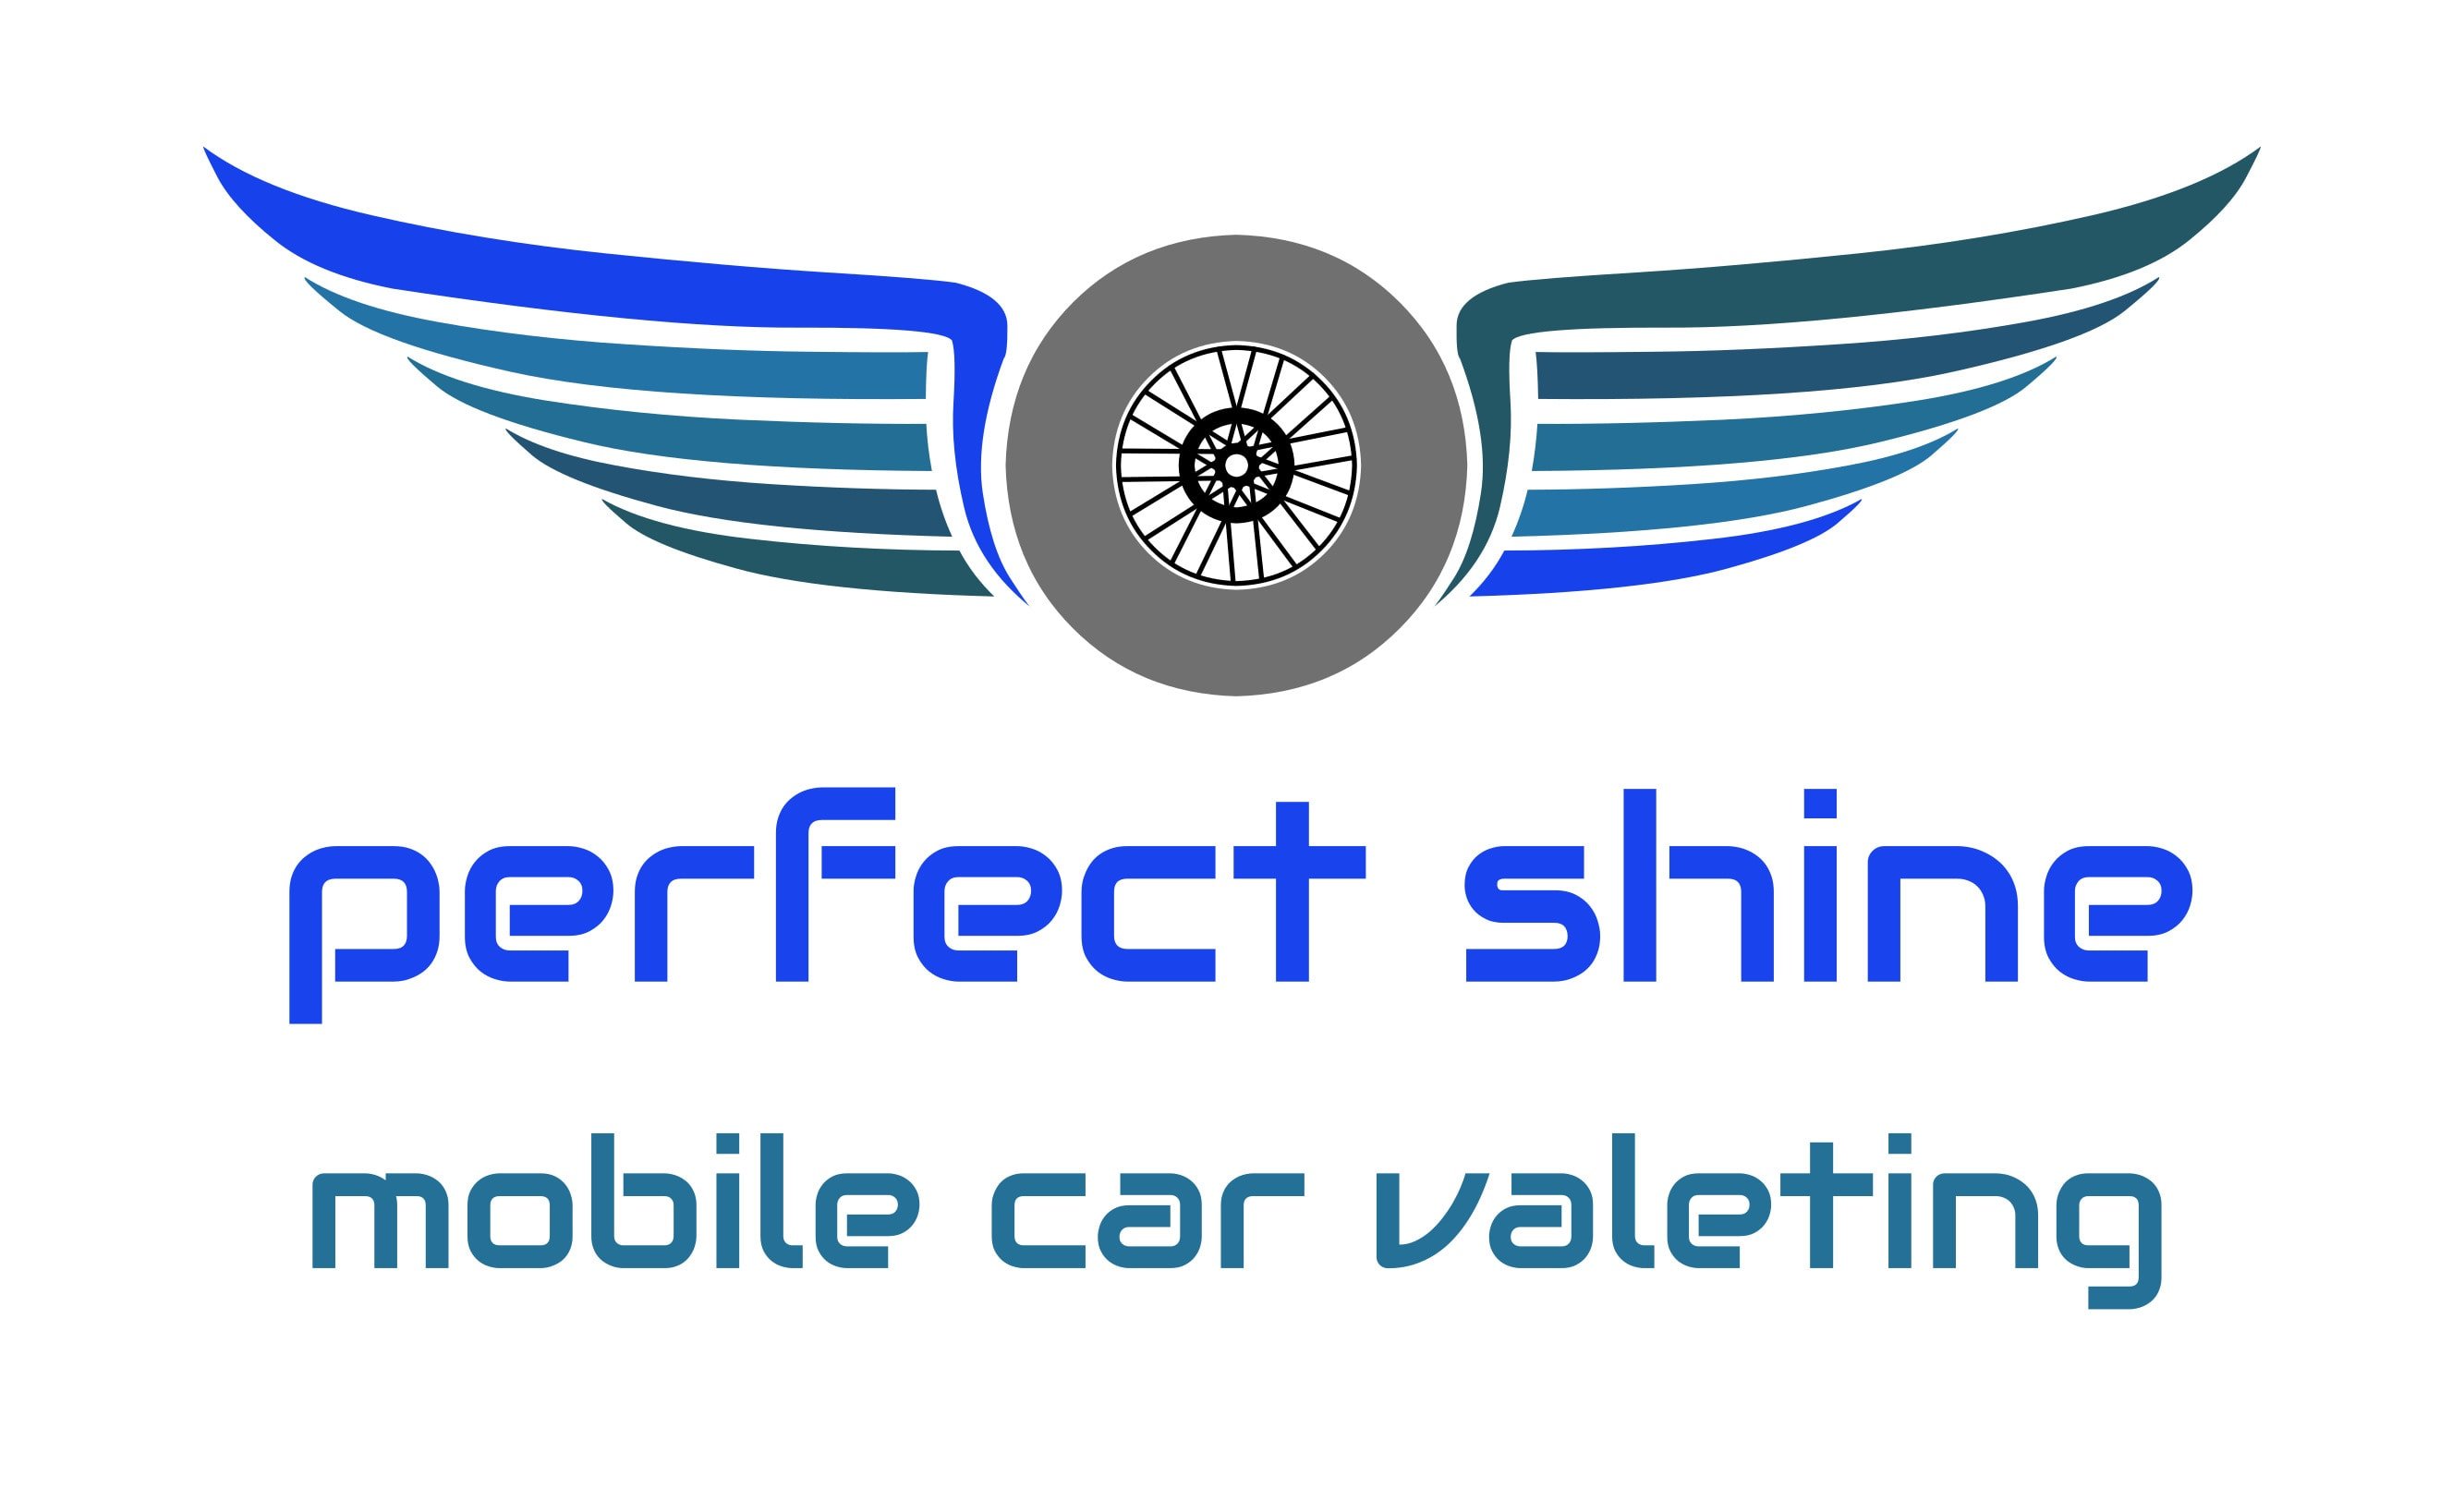 Perfect Shine mobile car valeting